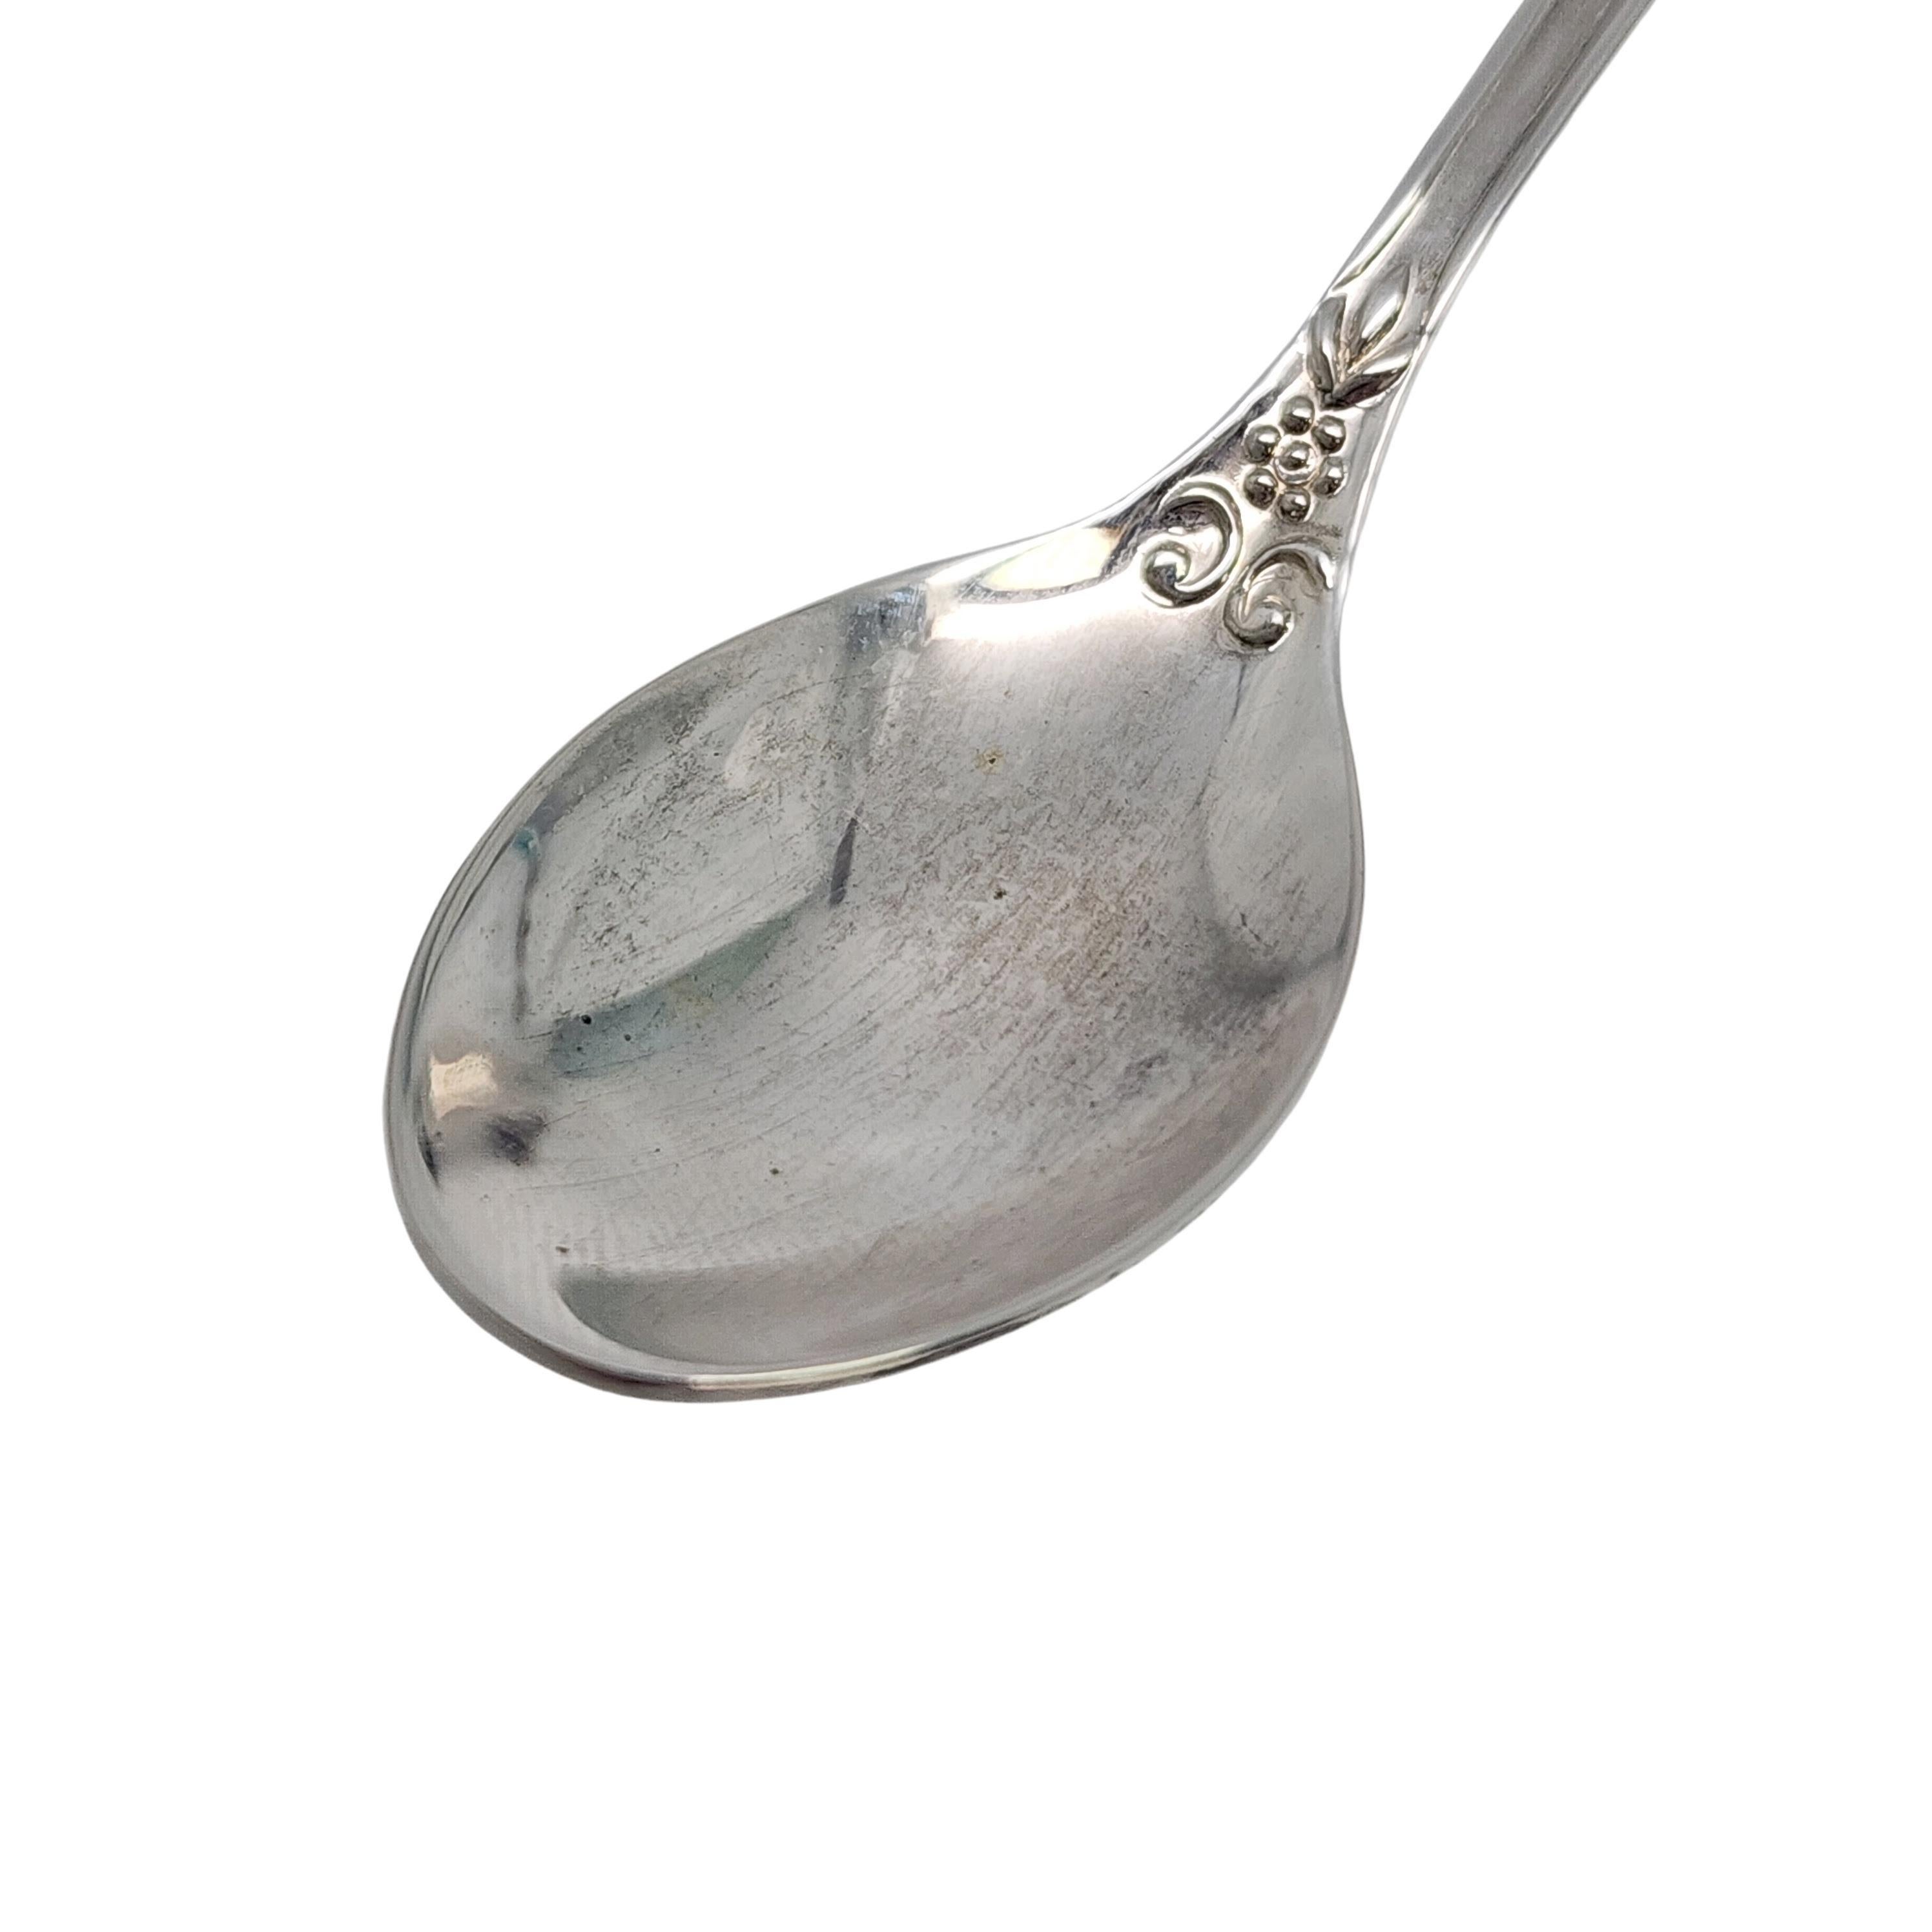 Tiffany & Co Sterling Silver Meadows Bunny Rabbit Baby Spoon with Pouch #16858 For Sale 1